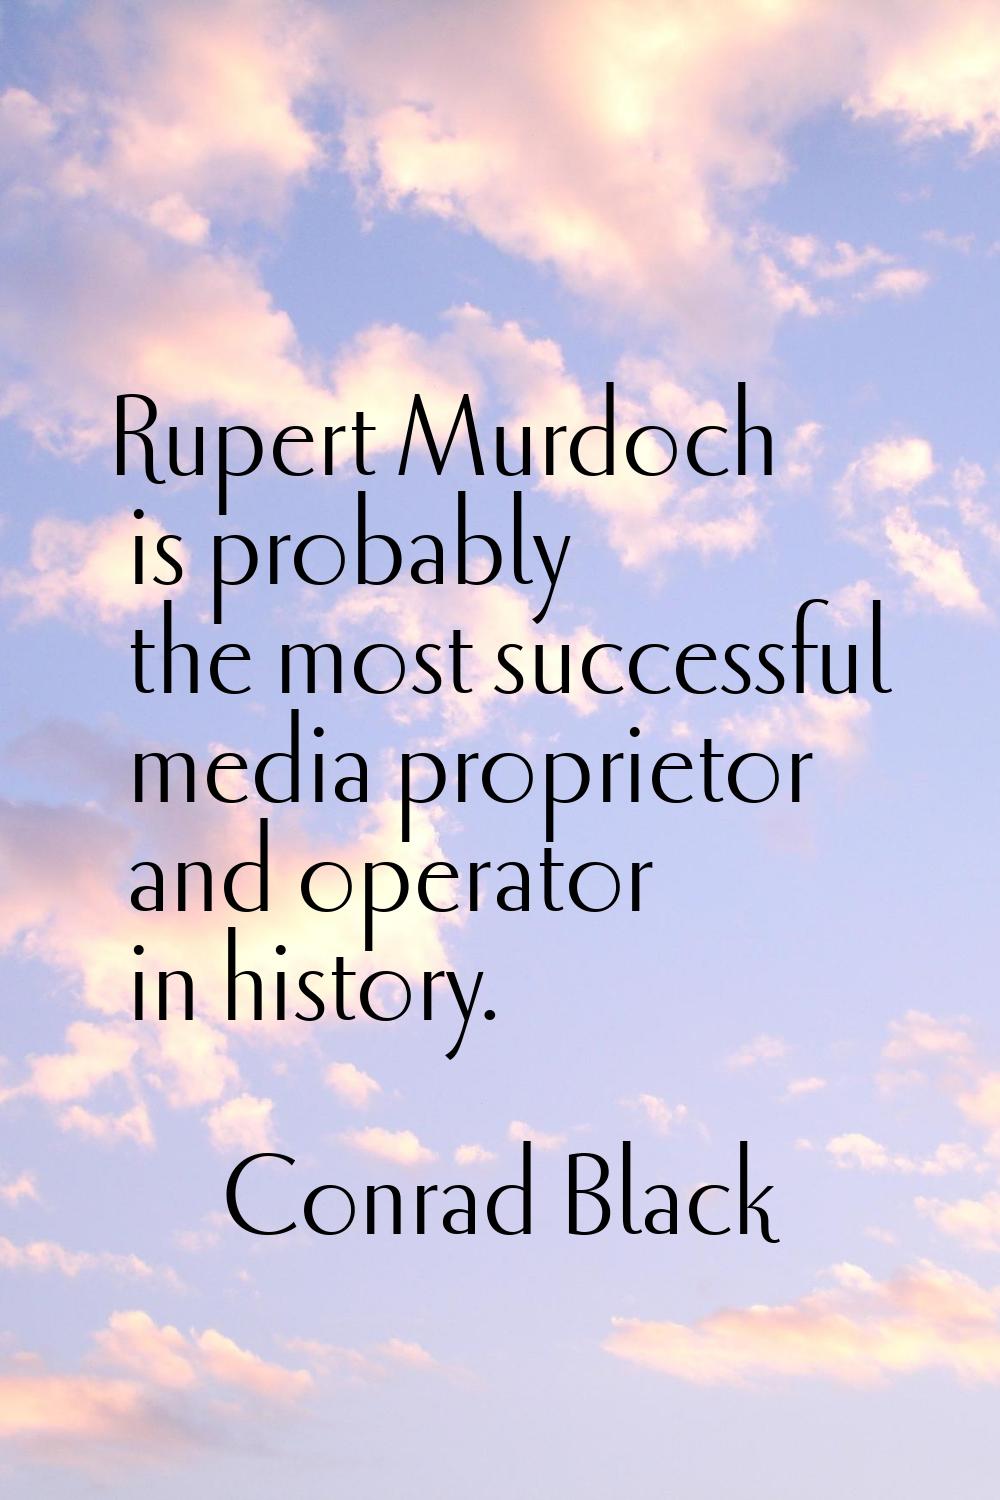 Rupert Murdoch is probably the most successful media proprietor and operator in history.